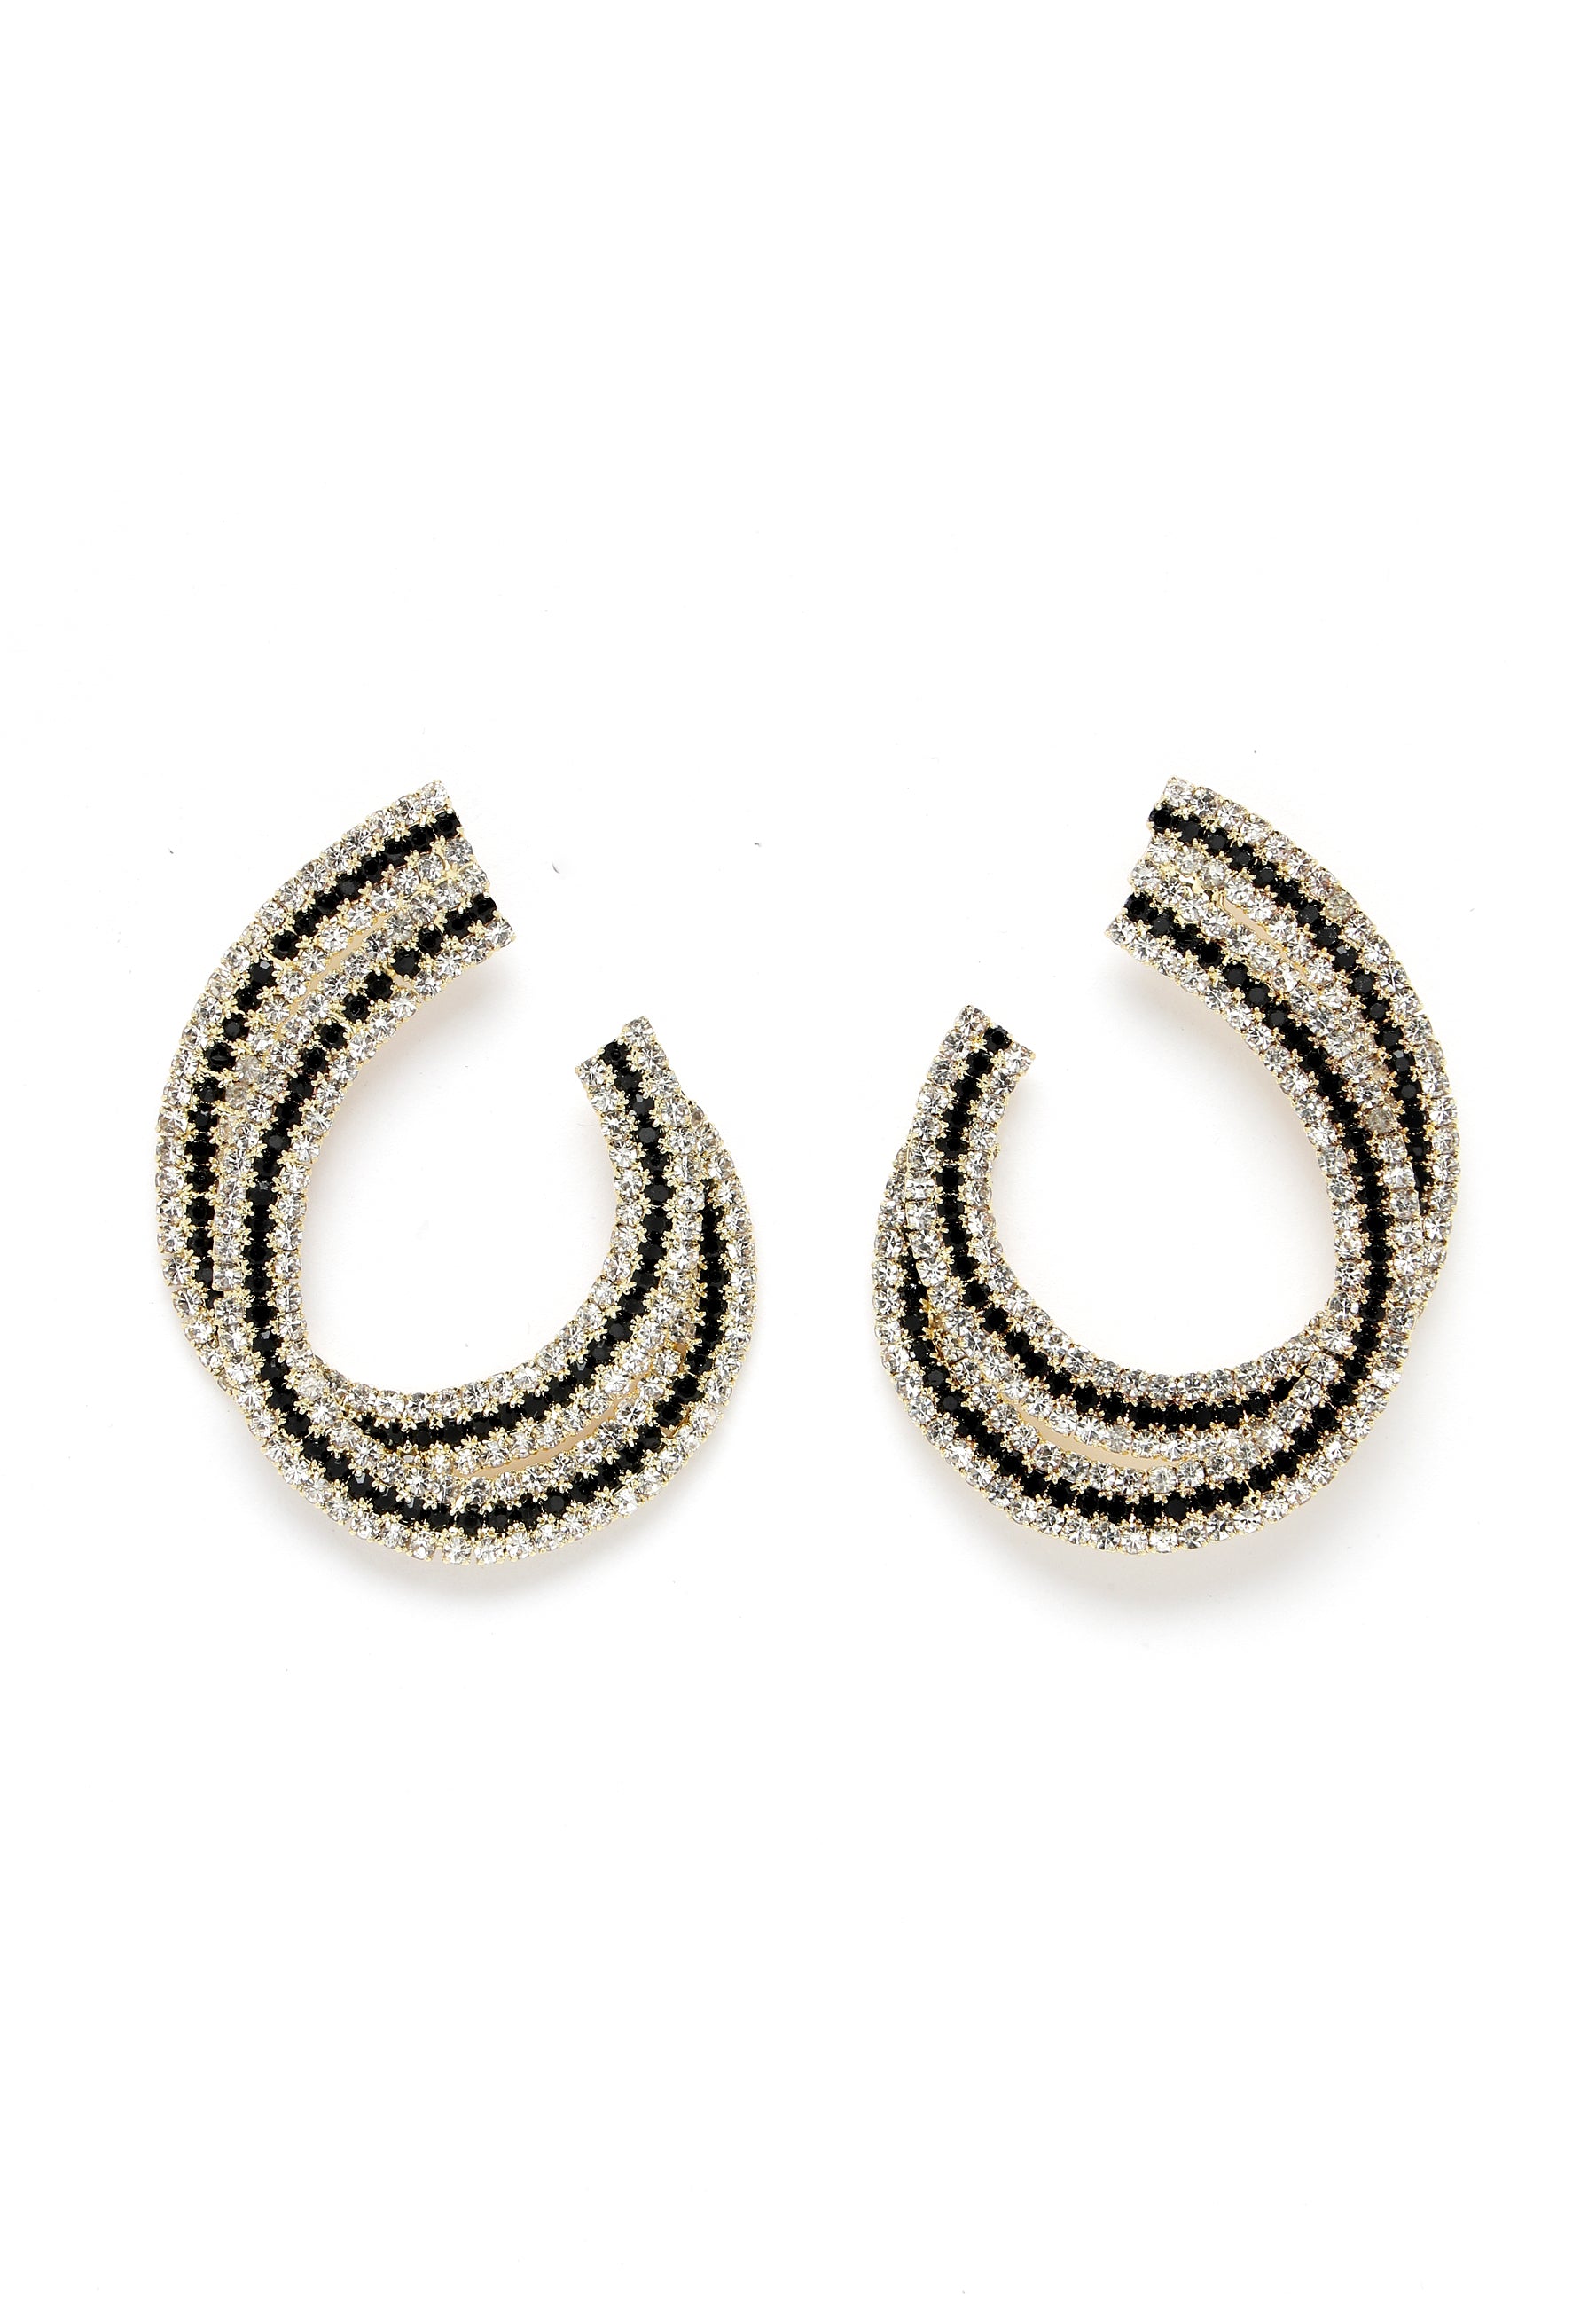 White Eclipse-Shaped Crystal Studded Earrings